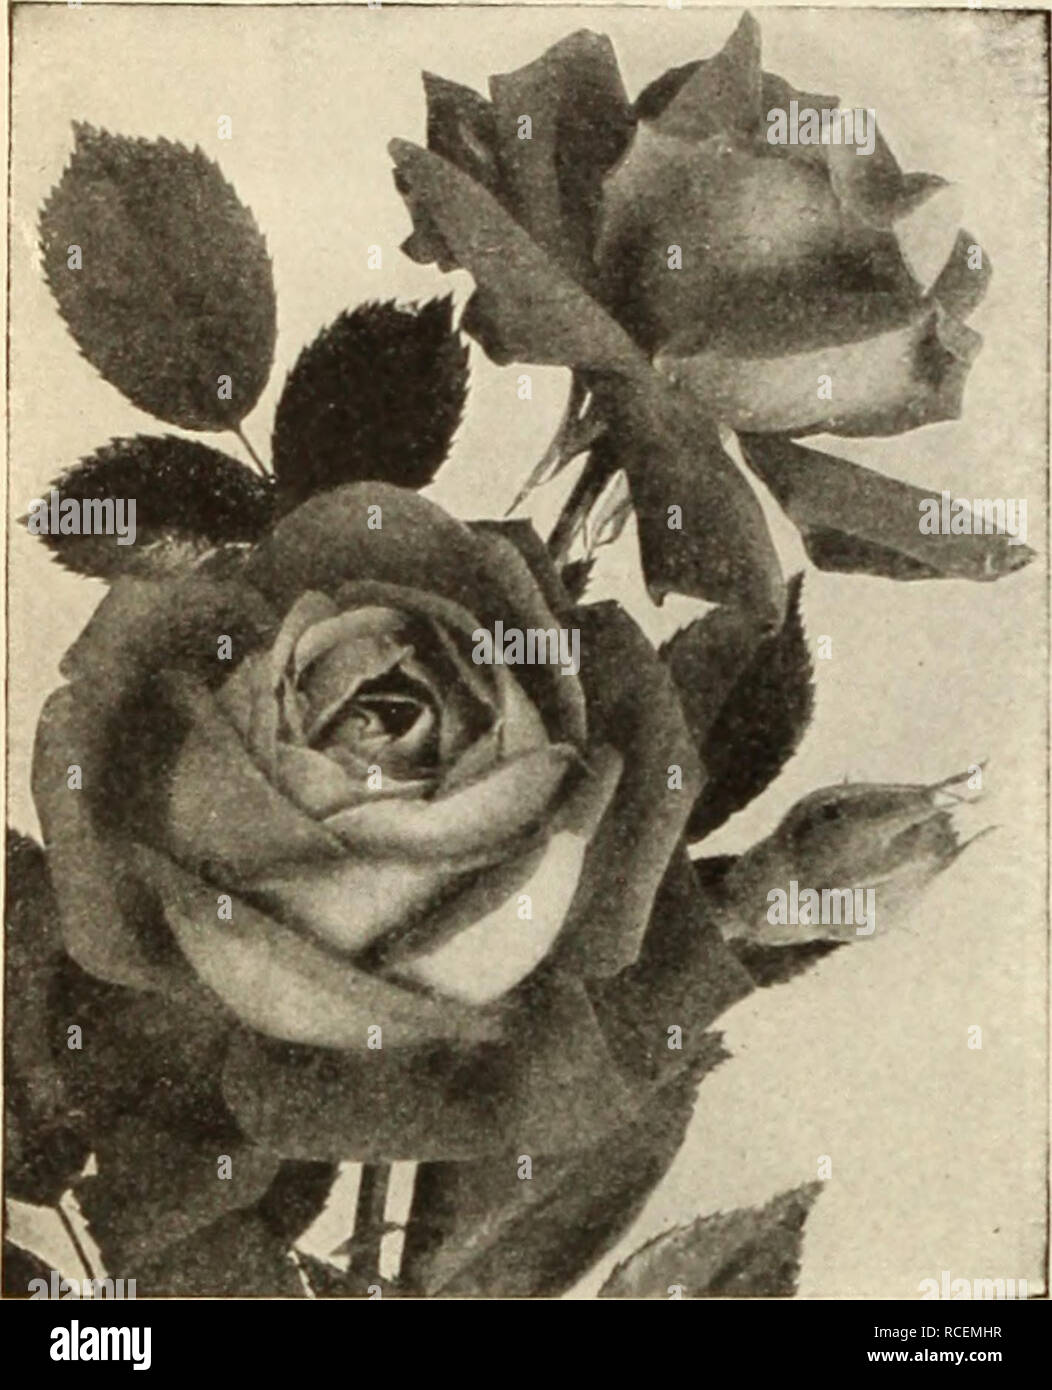 . Dingee guide to rose culture : 1917. PLANTS ARK WOXDERITL. 'The I&gt;lant^' are uonderfuJ. aiul haven't even shown sijjnH of tranKiilantin- I am delig:bted. Thank you very much for the two splendid Koses. Thev are p so viRorous.&quot;âMRS. FREDKRICK WILLIAMS, San Antonio Te-s Mar &quot;0 '16 ^&lt;a3?r^^st^aTSÂ»3Â«^, â¢?--J'ga^-^Oit^^&gt;y---^Â»&amp;K^ â t^^f^'j&lt;Â»Â»r-o'{airvv.y^^?N^v./;;rtf--s.fsa ^|S^^3^^?^^^^ DINGEE&amp;CONARDCO. WEST GROVE,PA. Prince E. C. d'Arenberg In no Rose of recent introduction have we found so many desirable features as there are in Prince E. C. d'Arenberg and w Stock Photo